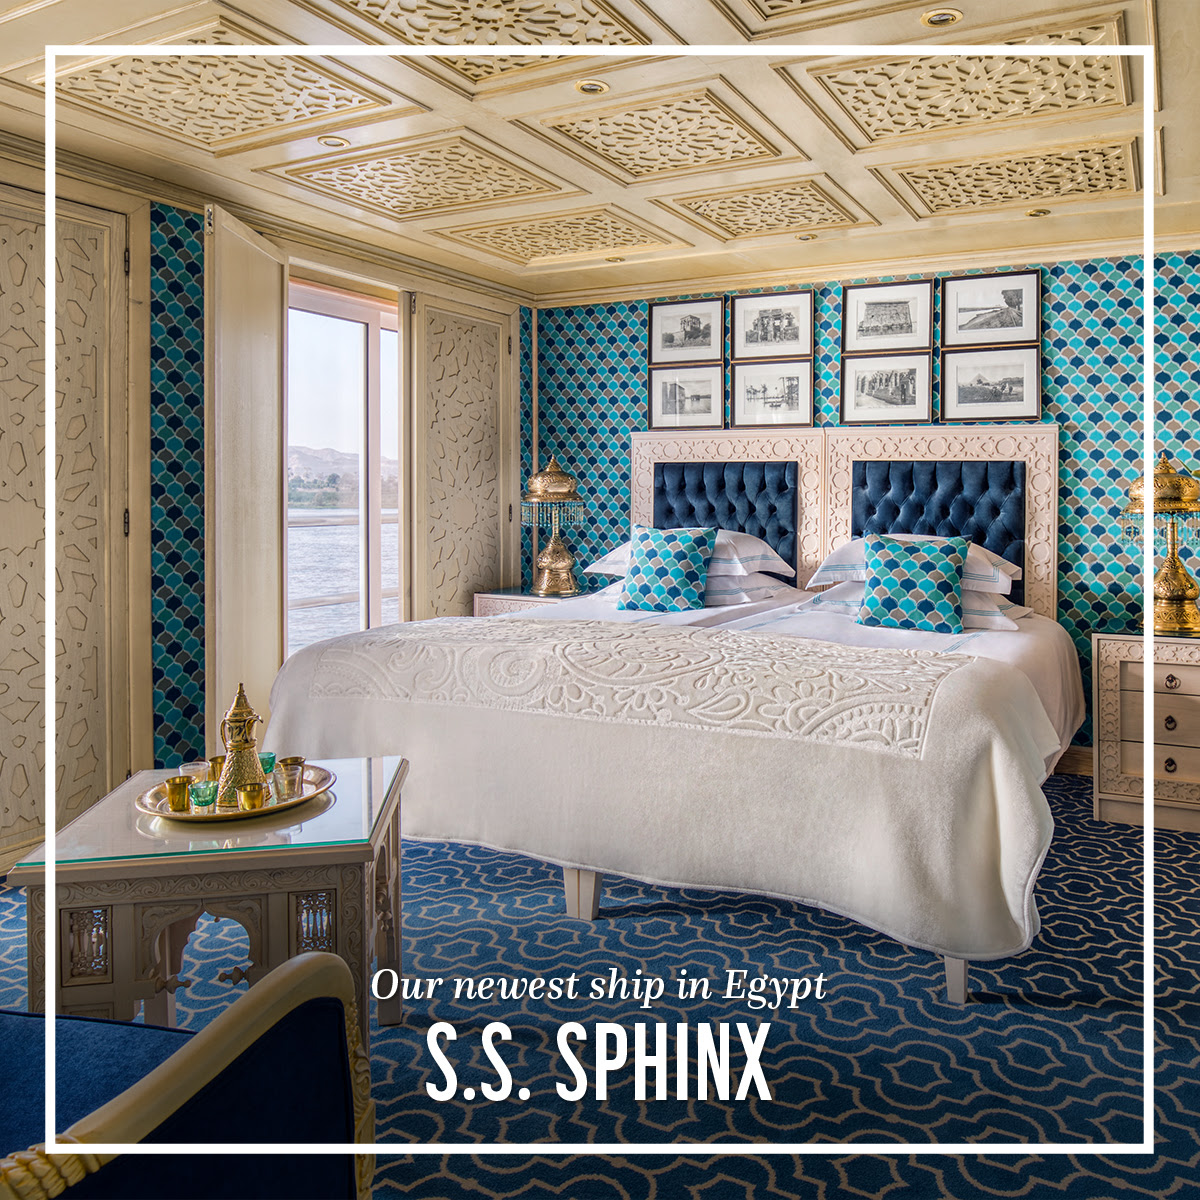 Our Newest Ship in Egypt S.S. Sphinx